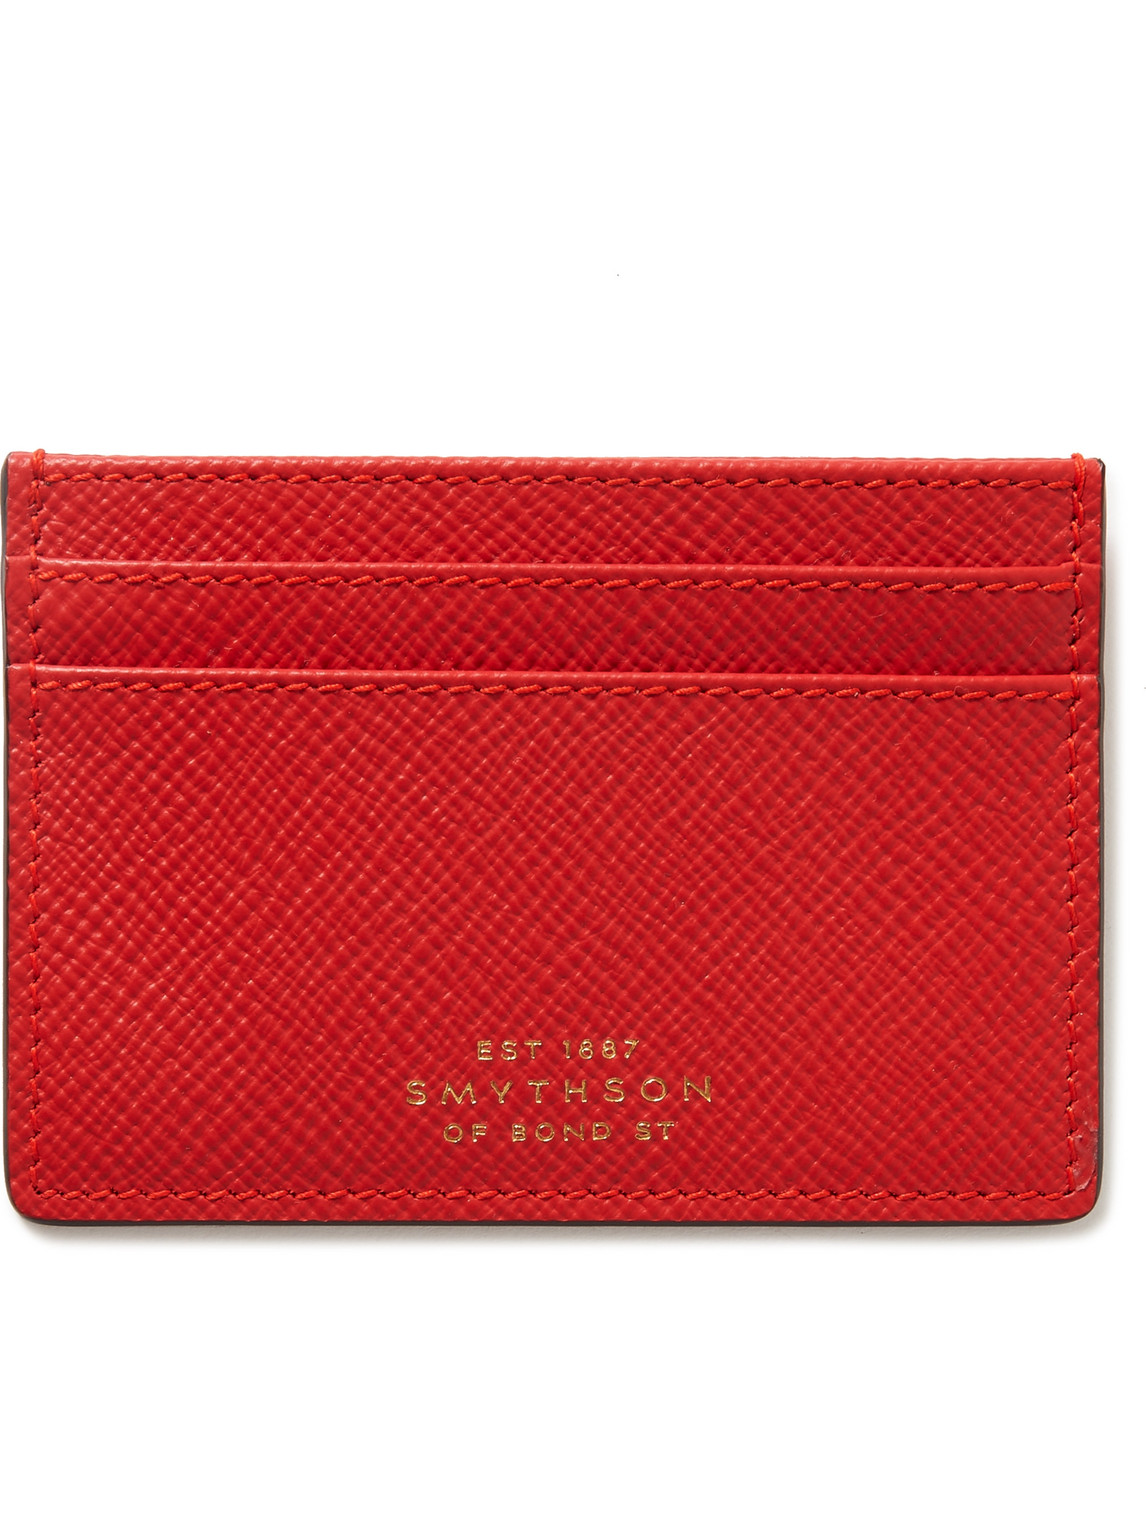 Smythson Panama Cross-grain Leather Cardholder In Red